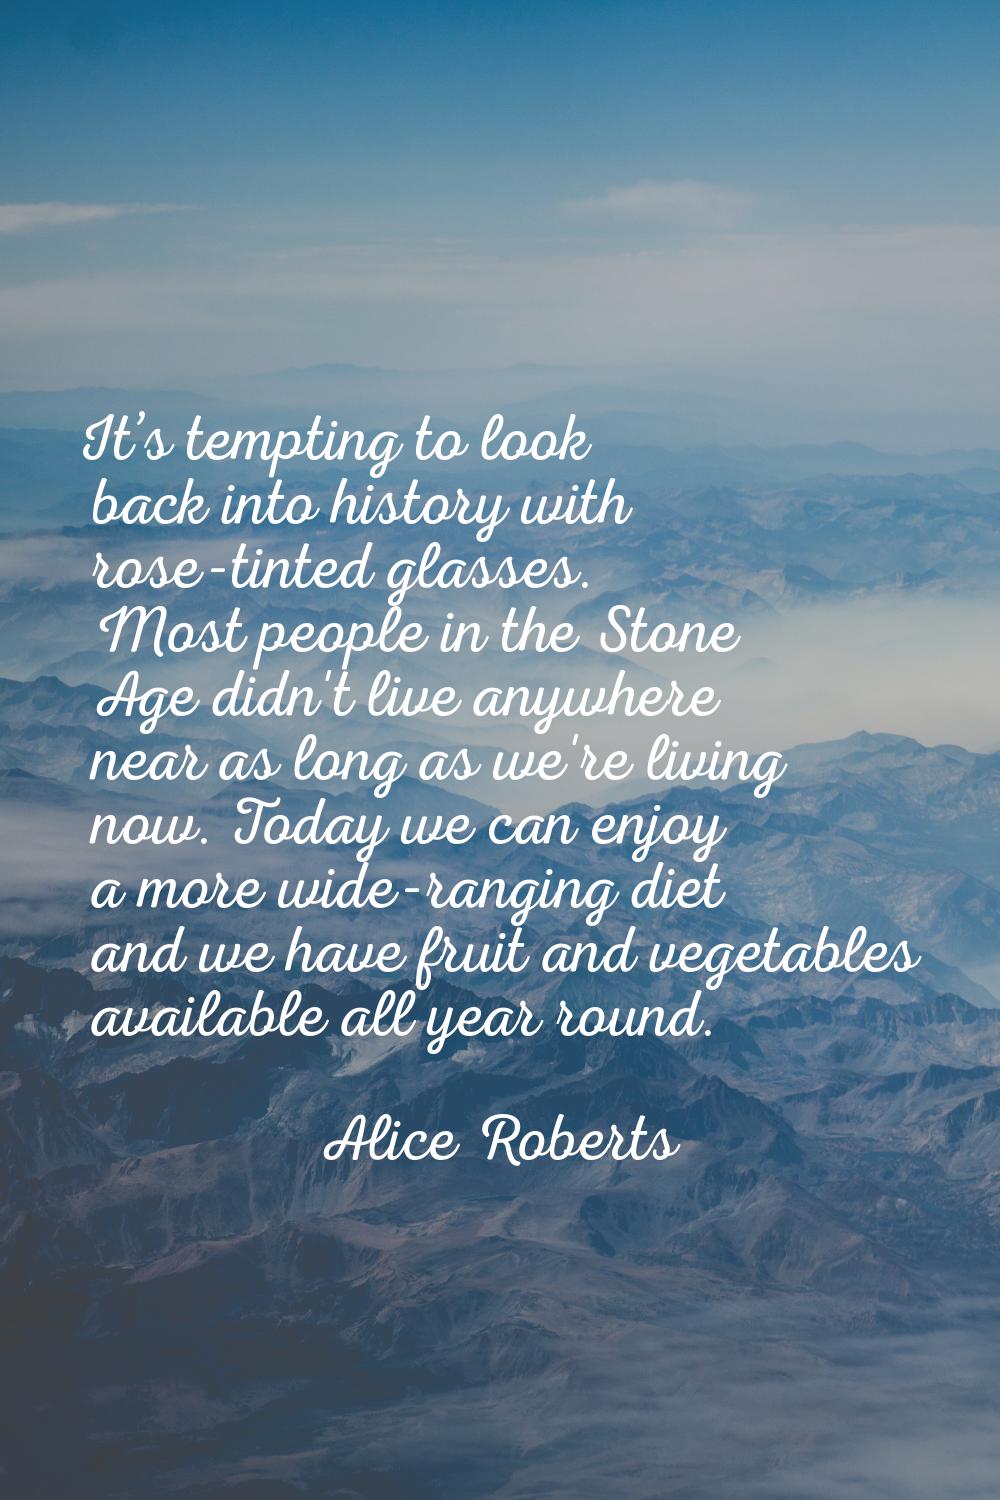 It’s tempting to look back into history with rose-tinted glasses. Most people in the Stone Age didn